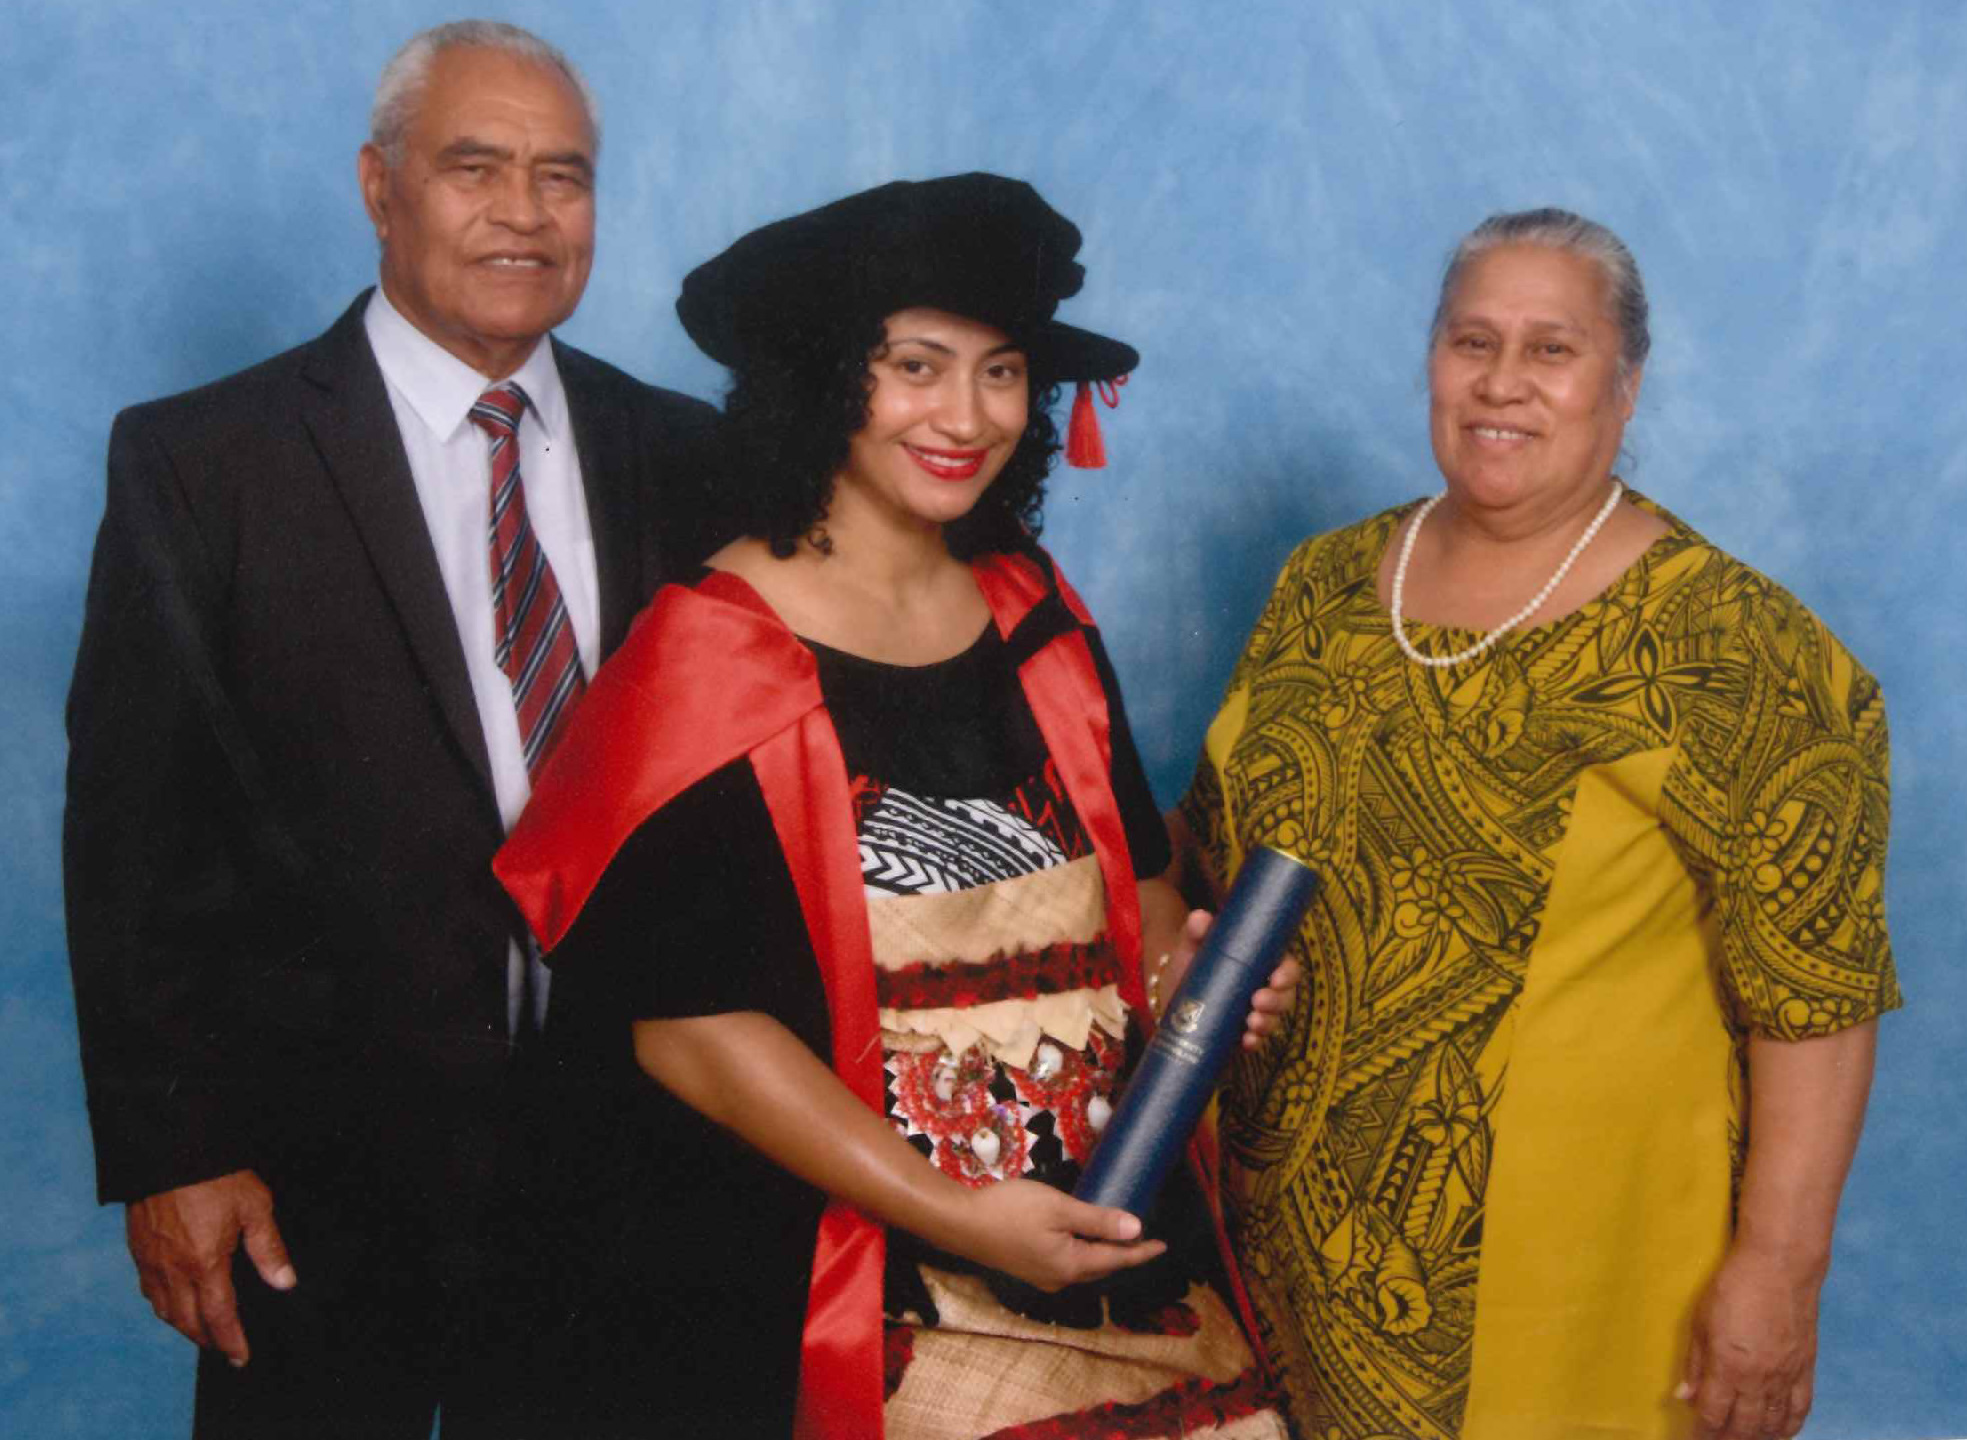 Woman wears traditional Tongan attire under her black graduation gown, with parents by her side smiling.